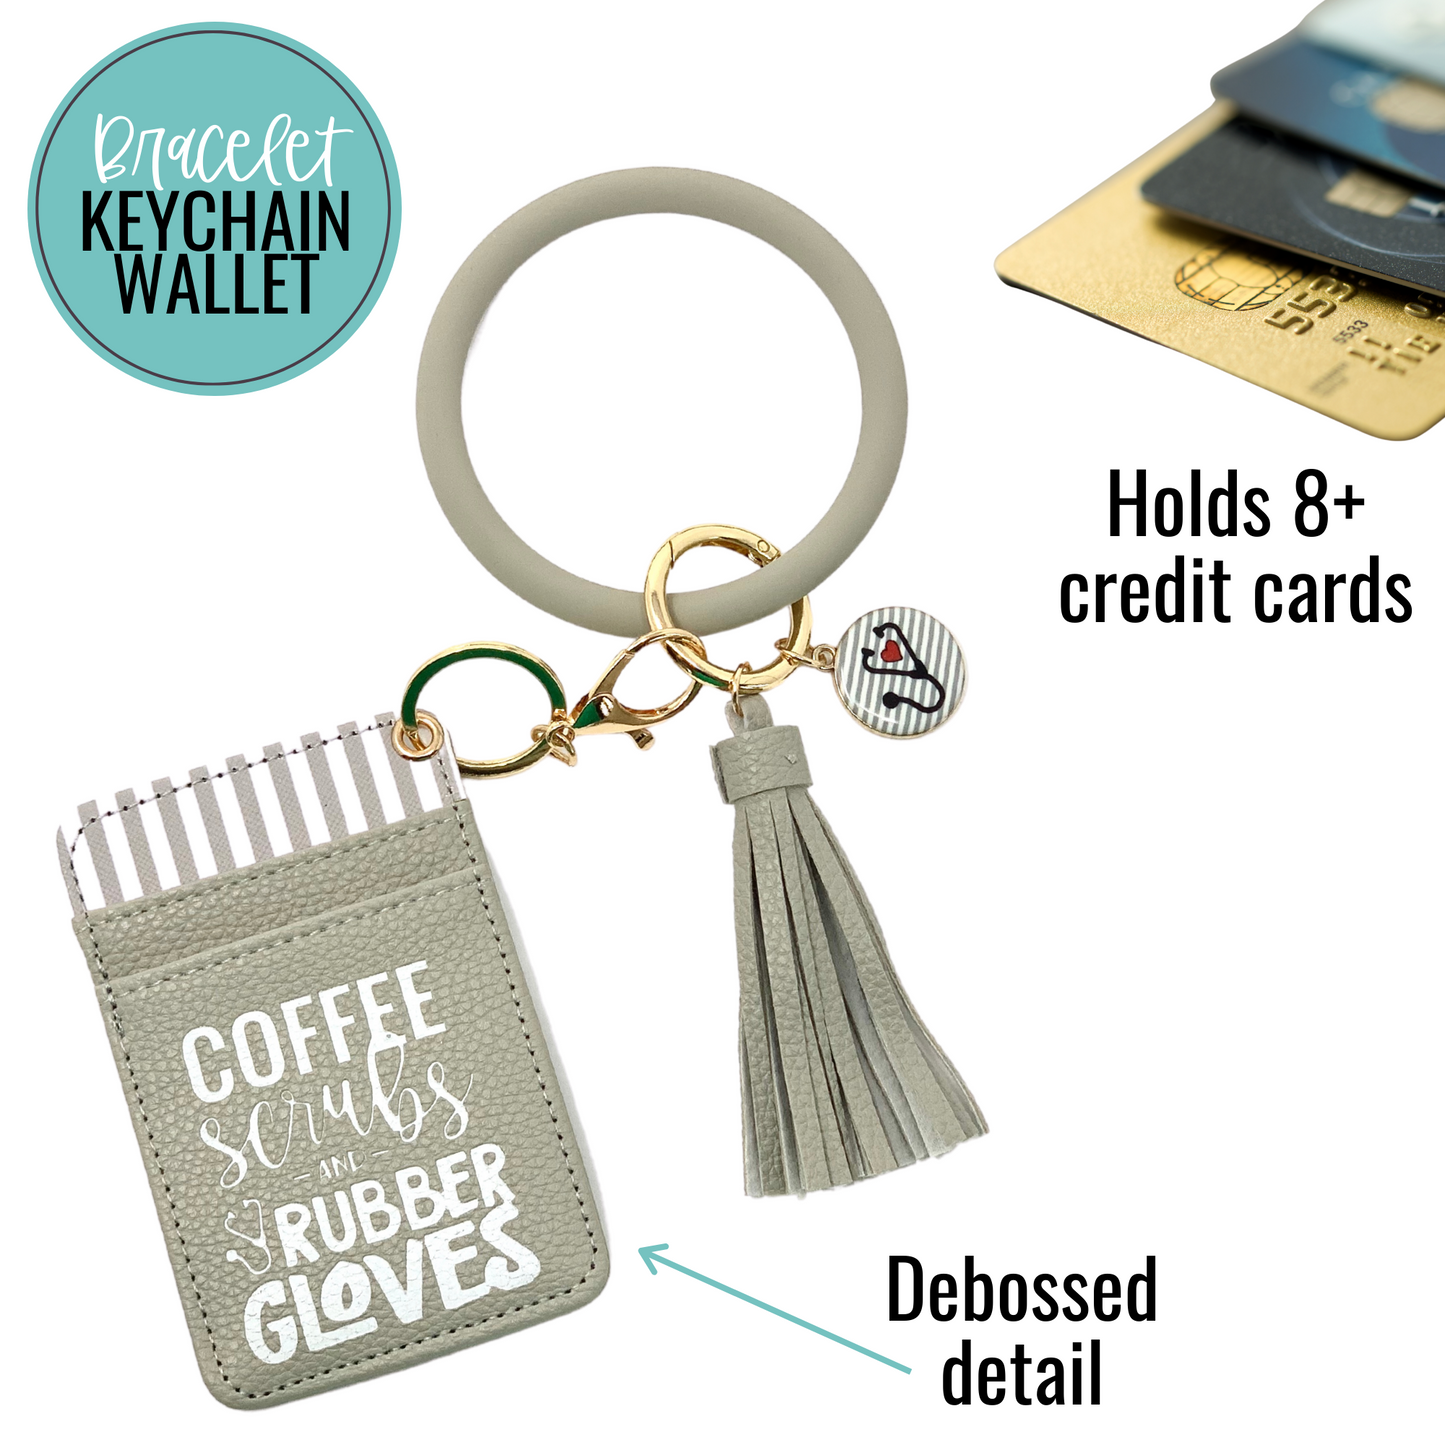 Coffee Scrubs & Rubber Gloves Gray Silicone Bracelet Wallet Keychain for Medical Workers